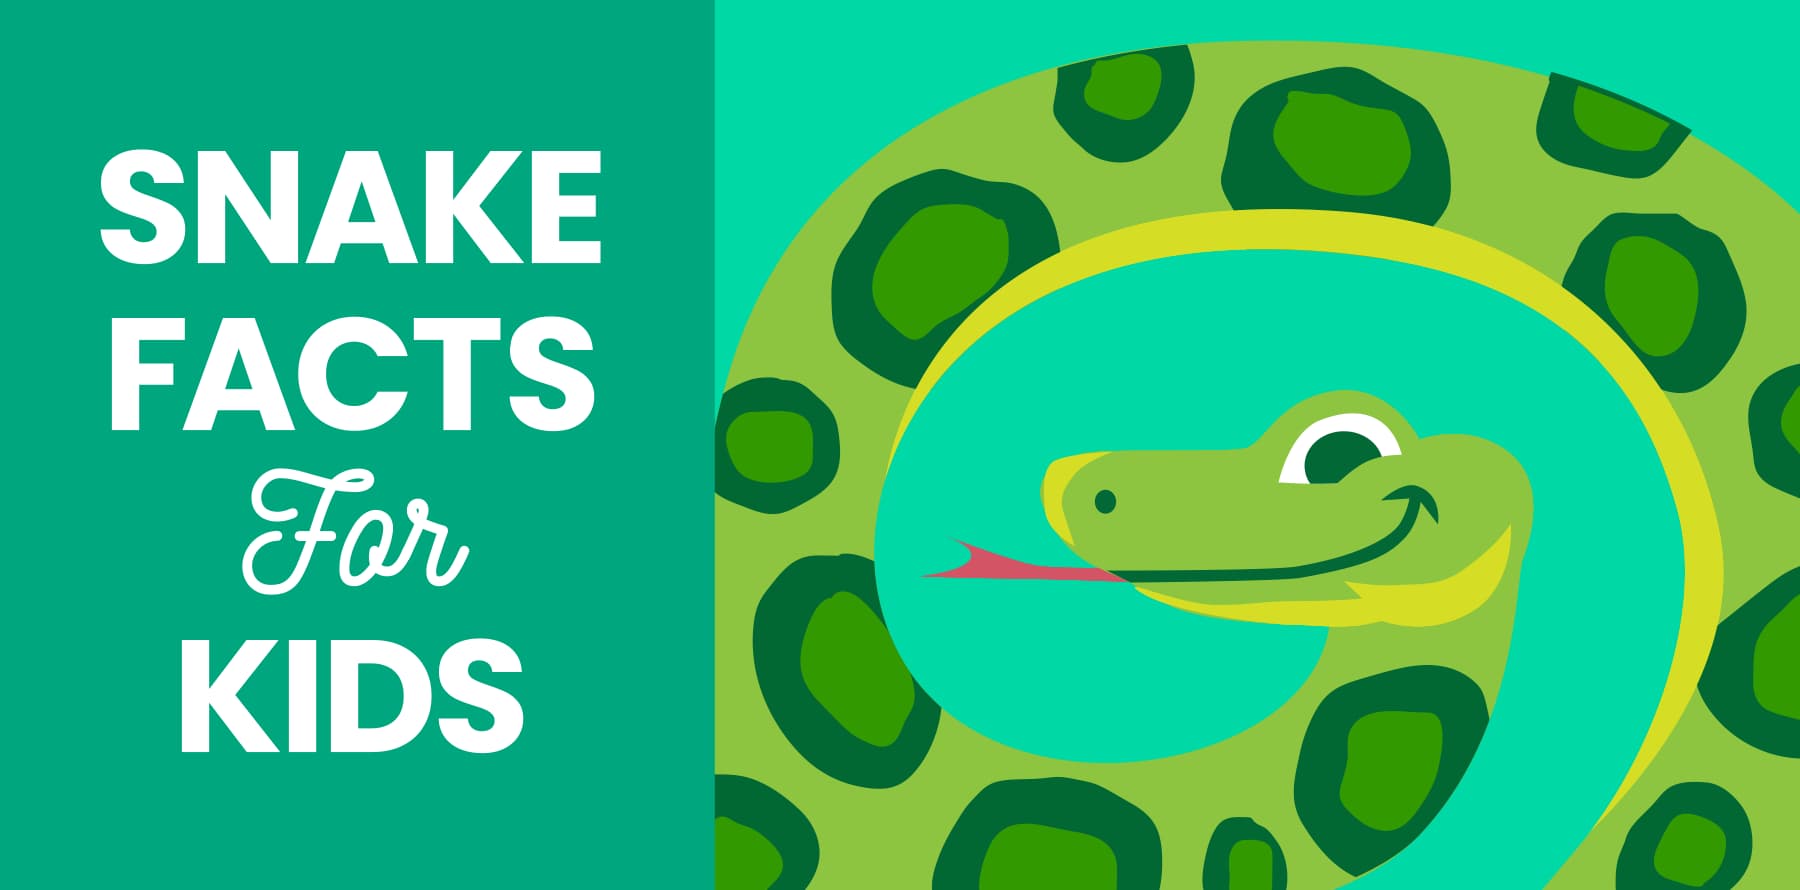 Snake facts for kids from Little Passports